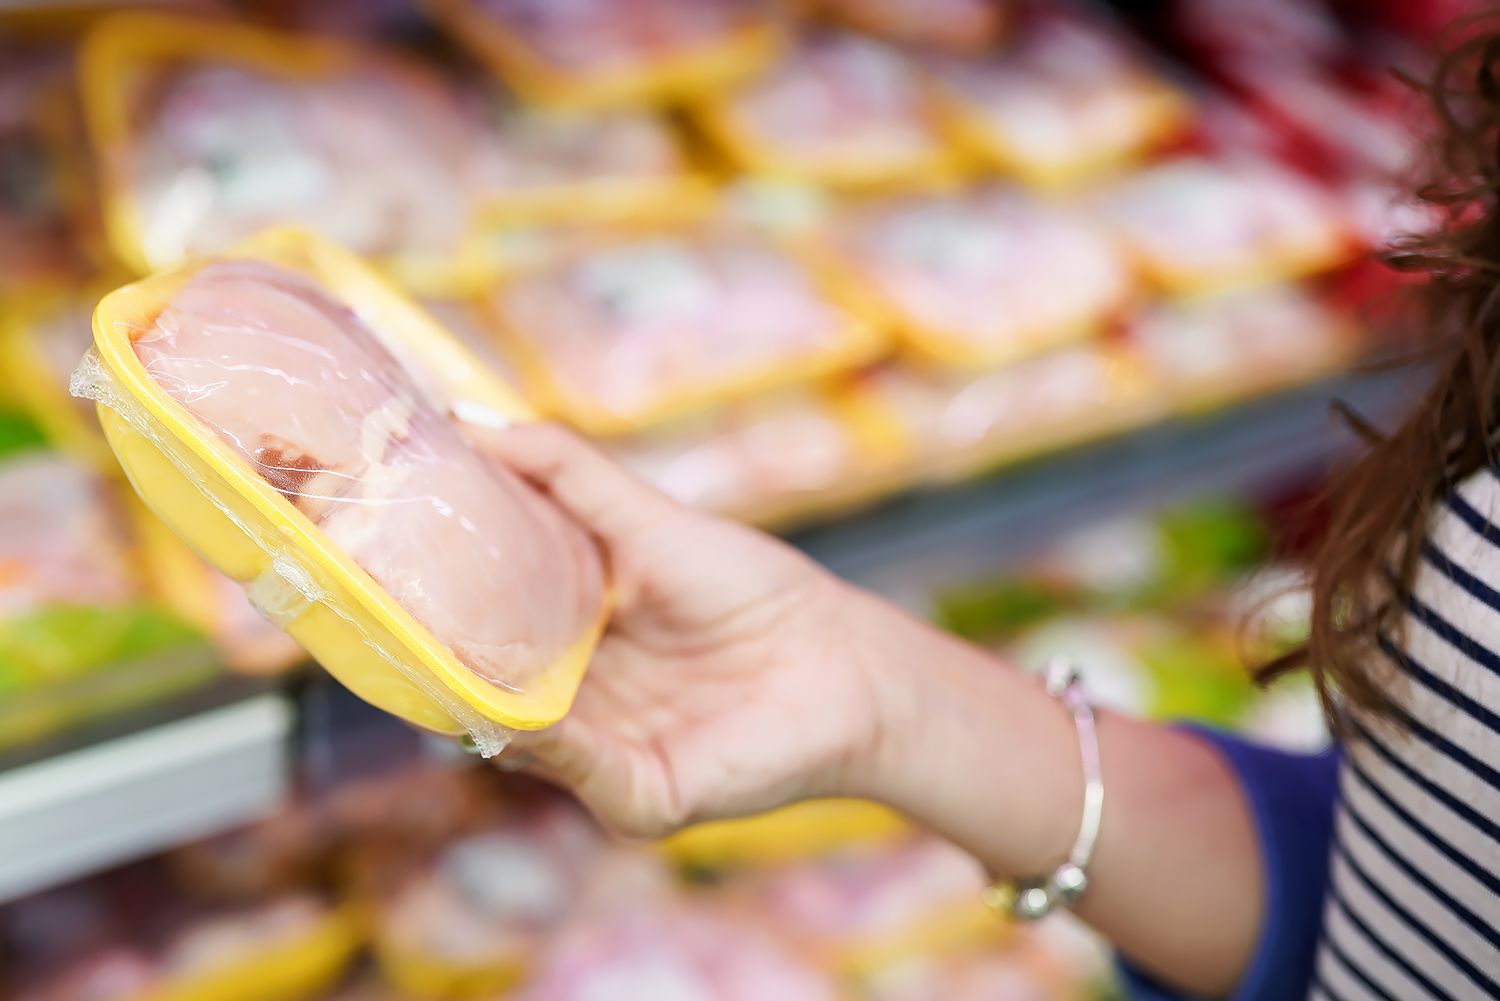 arm reached out to pull chicken breast from meat section